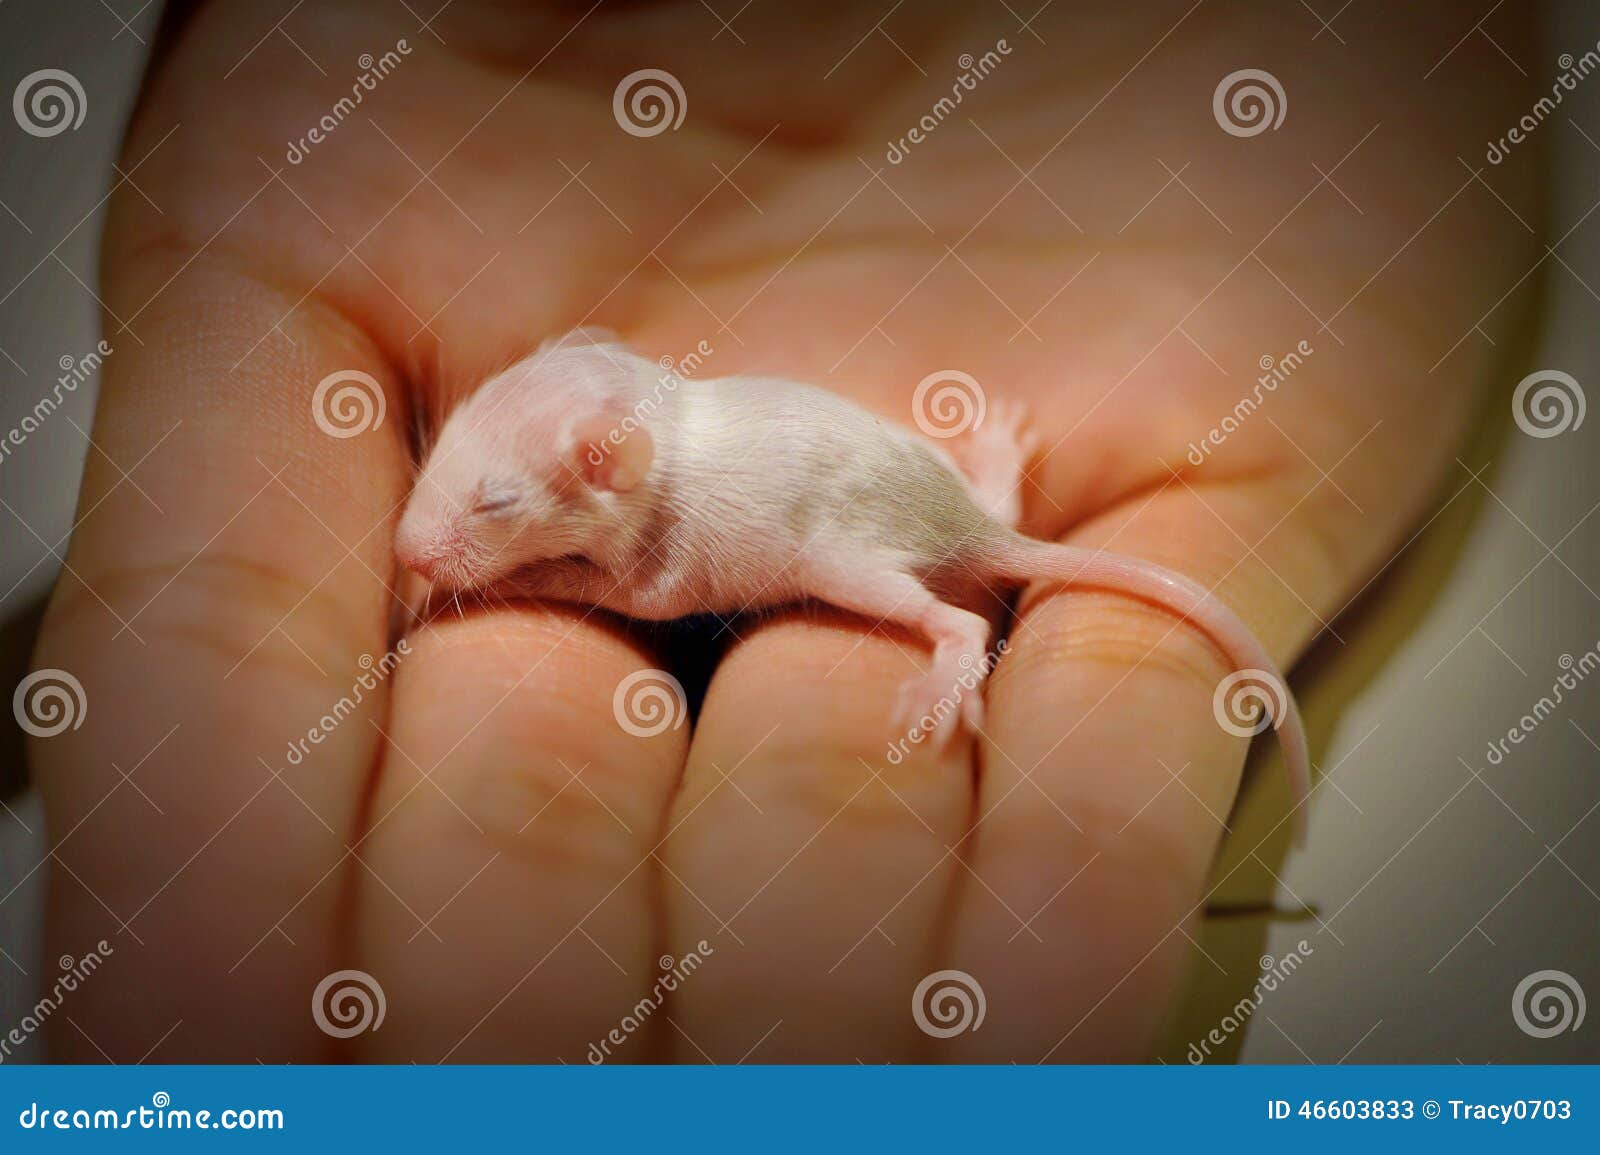 7 576 Baby Mouse Photos Free Royalty Free Stock Photos From Dreamstime